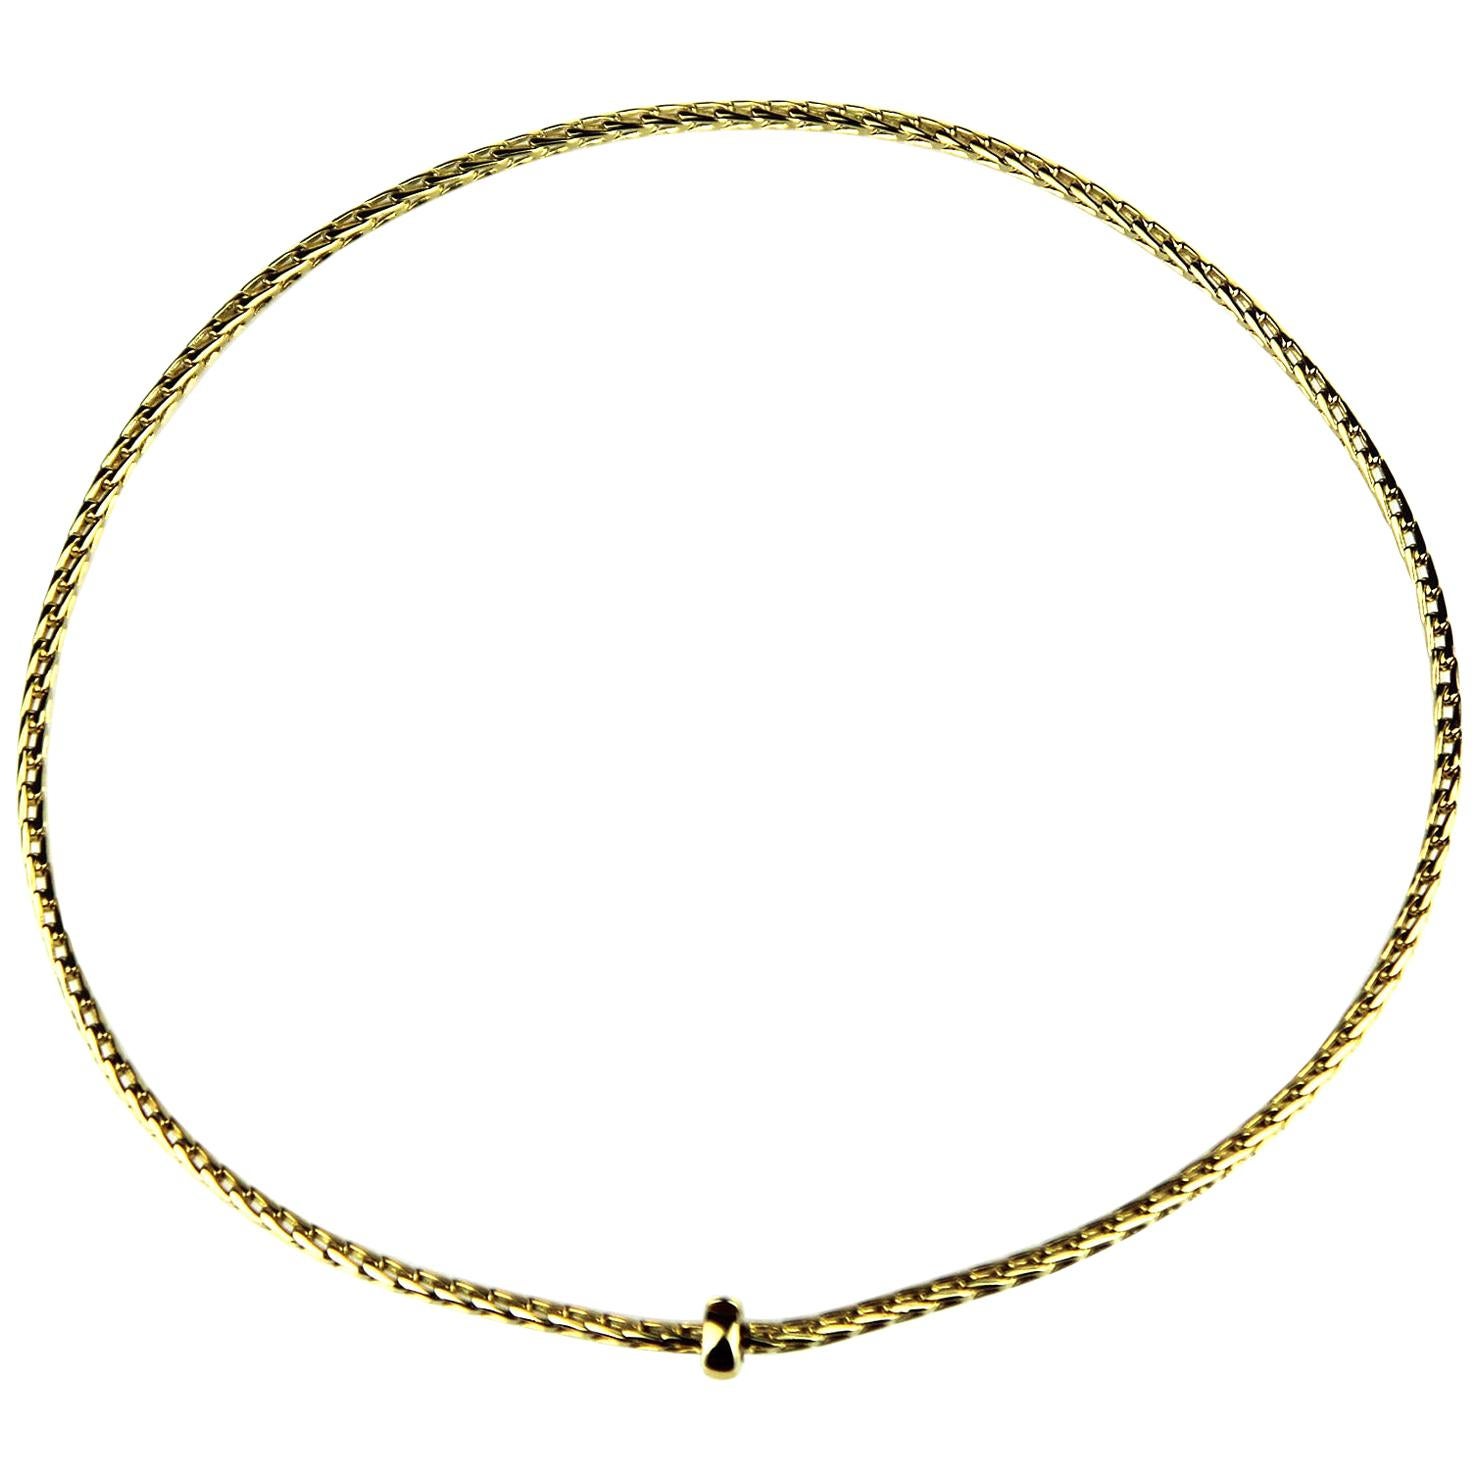 Pomellato Chain/Necklace in 18 Carat Yellow Gold, Gents/Ladies For Sale